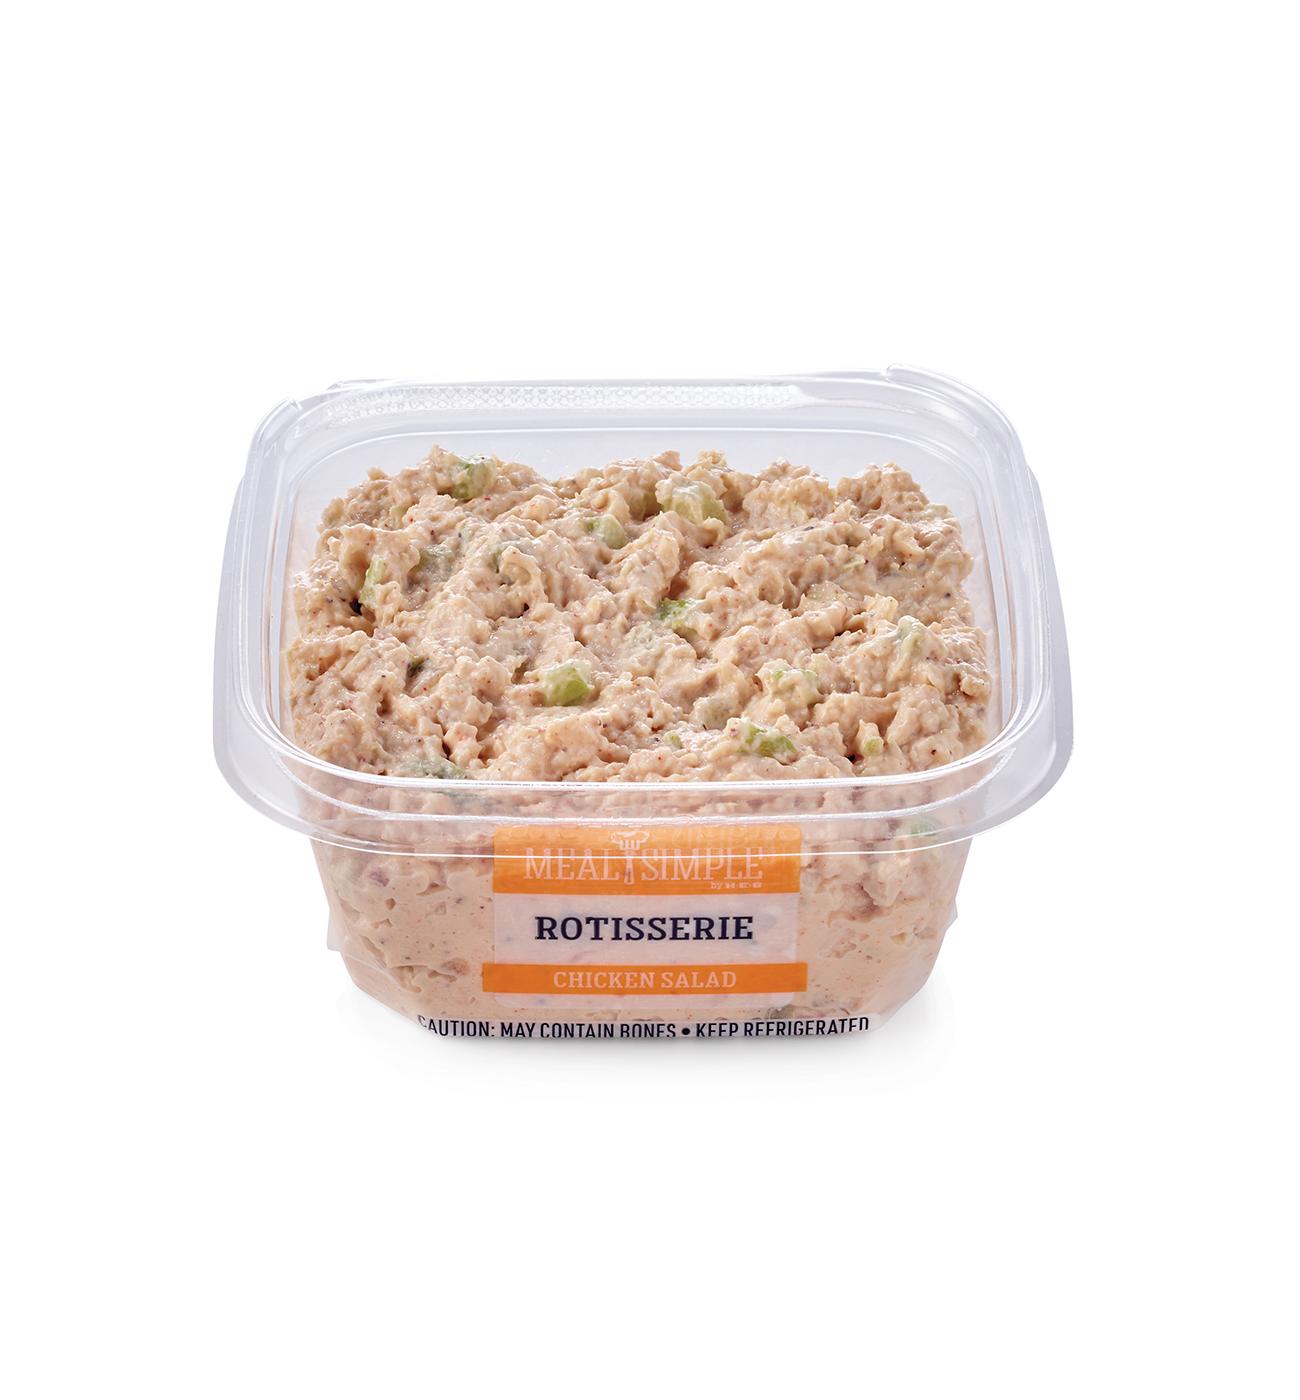 Meal Simple by H-E-B Rotisserie Chicken Salad - Small; image 1 of 4